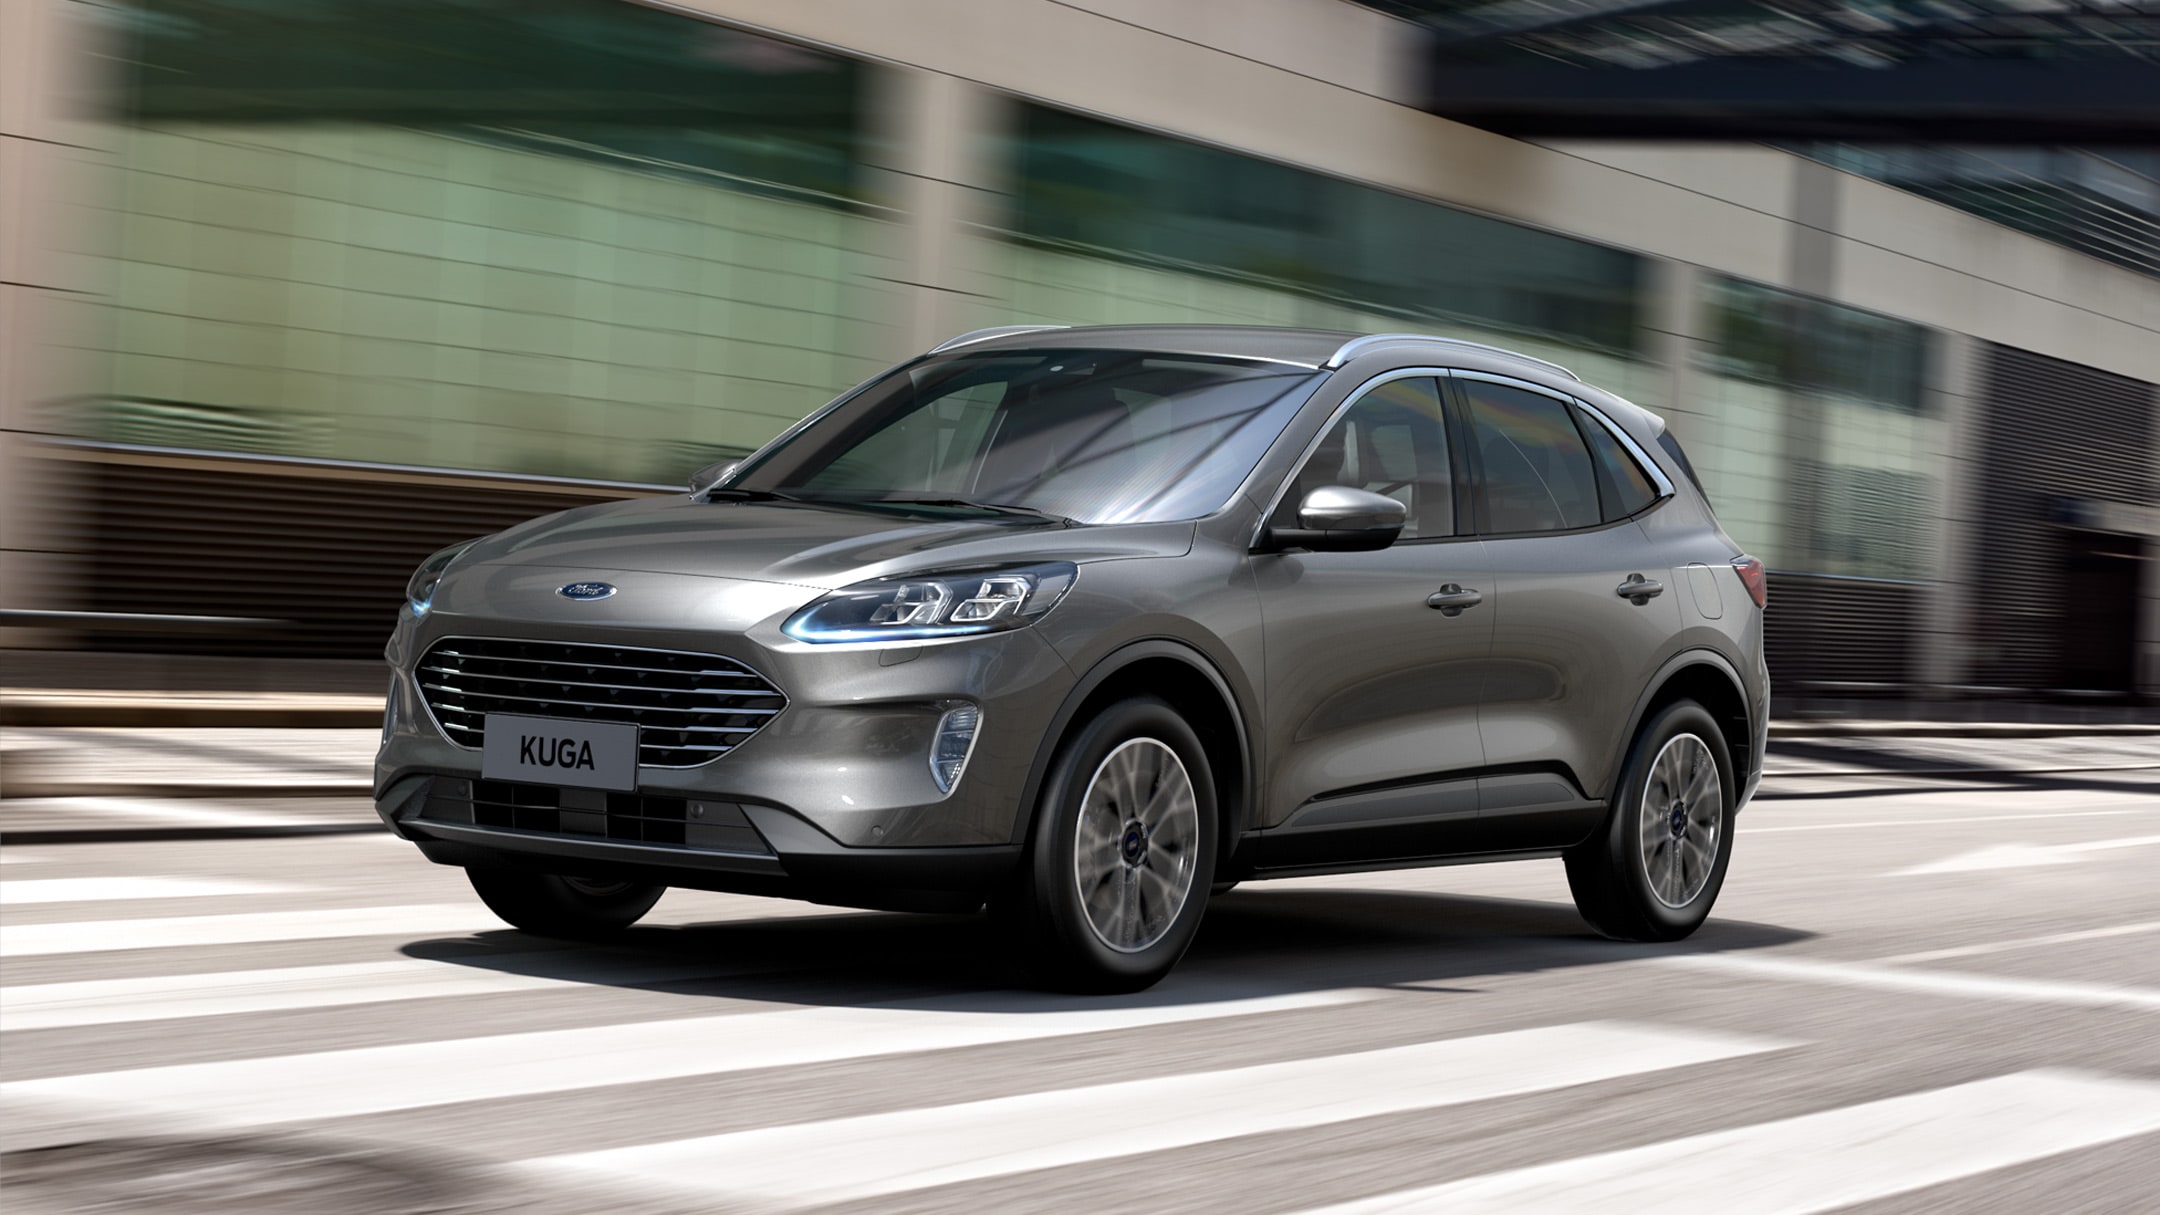 Gray Ford Kuga on the city road